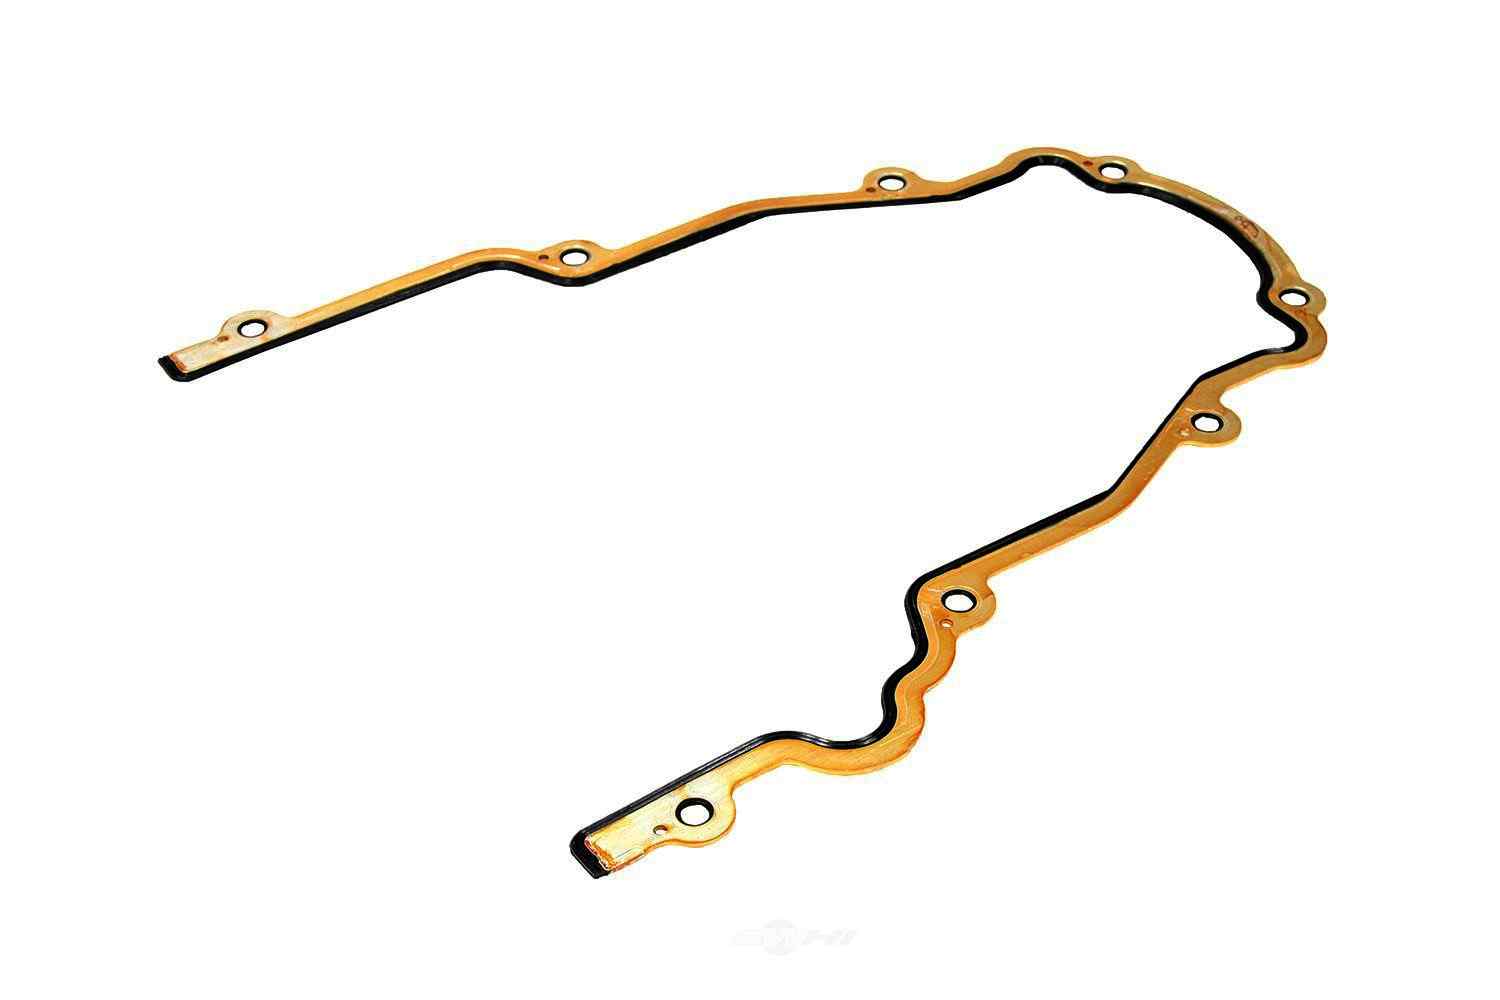 GM GENUINE PARTS - Engine Timing Cover Gasket - GMP 12633904